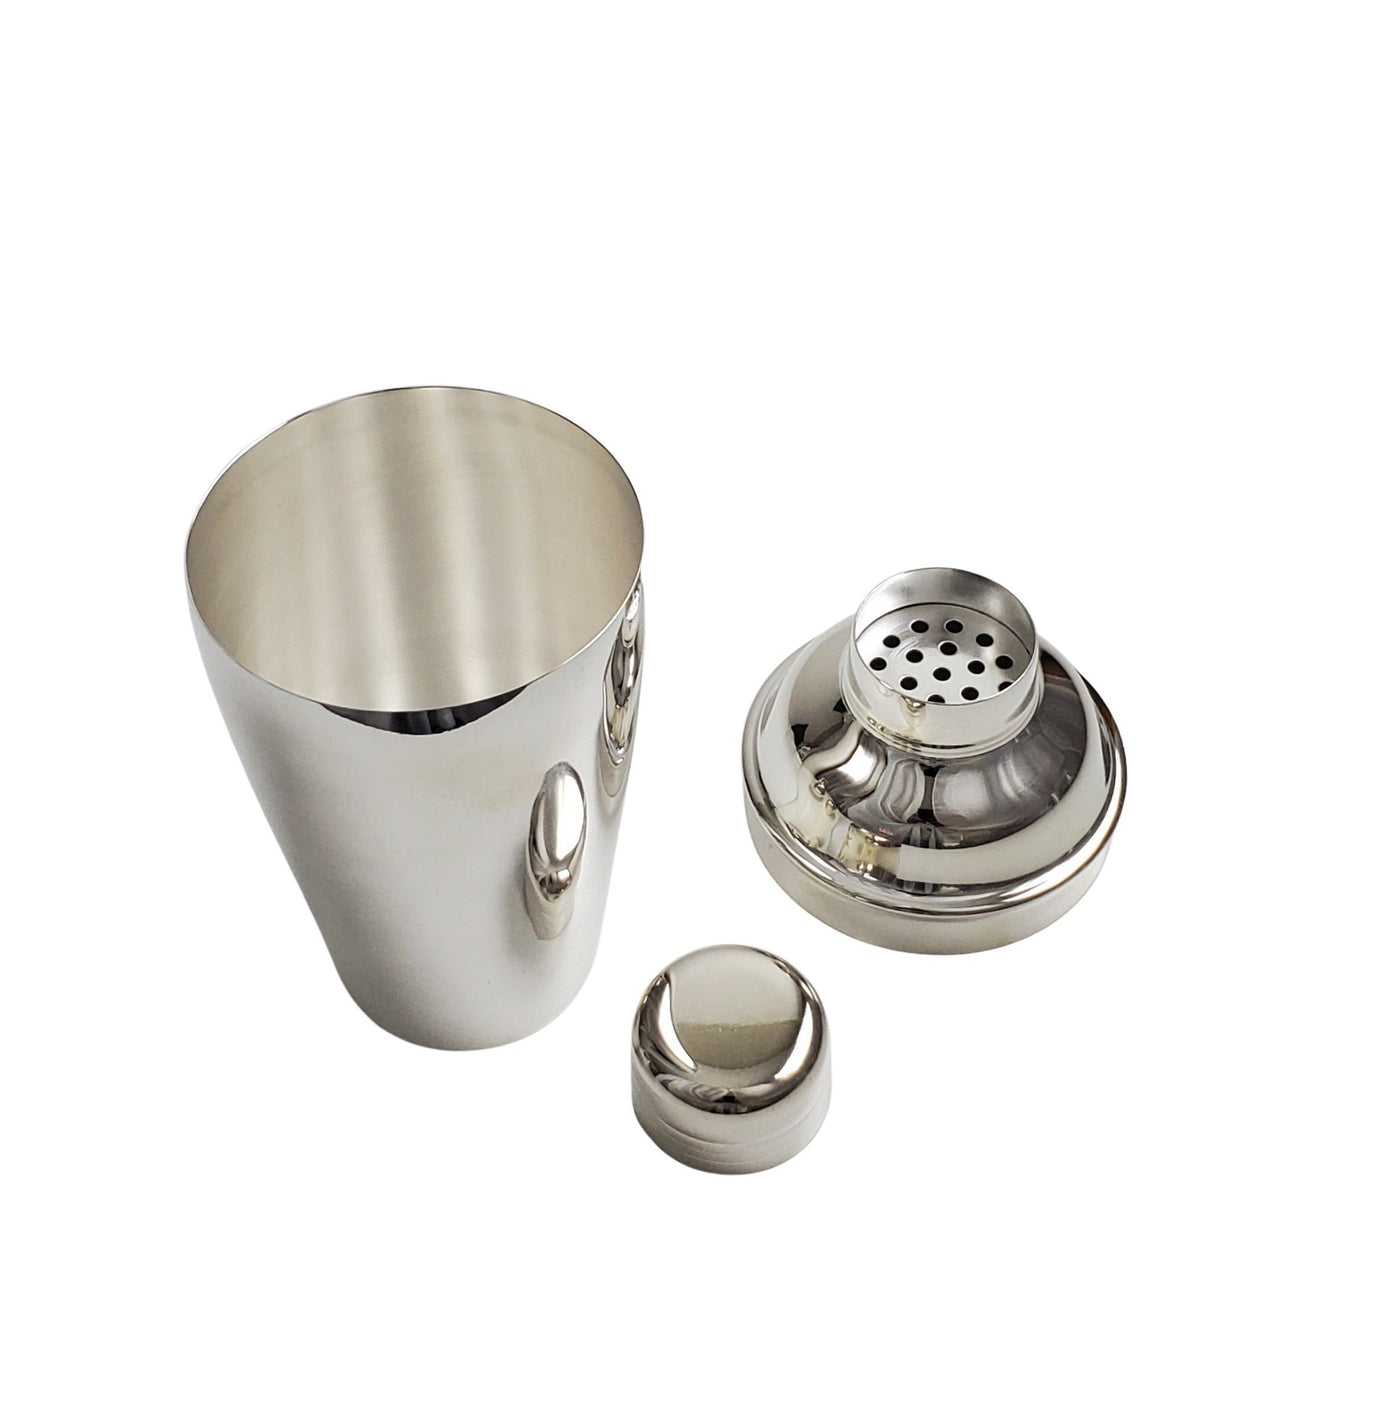 COCKTAIL SHAKER PLAIN SILVER PLATED